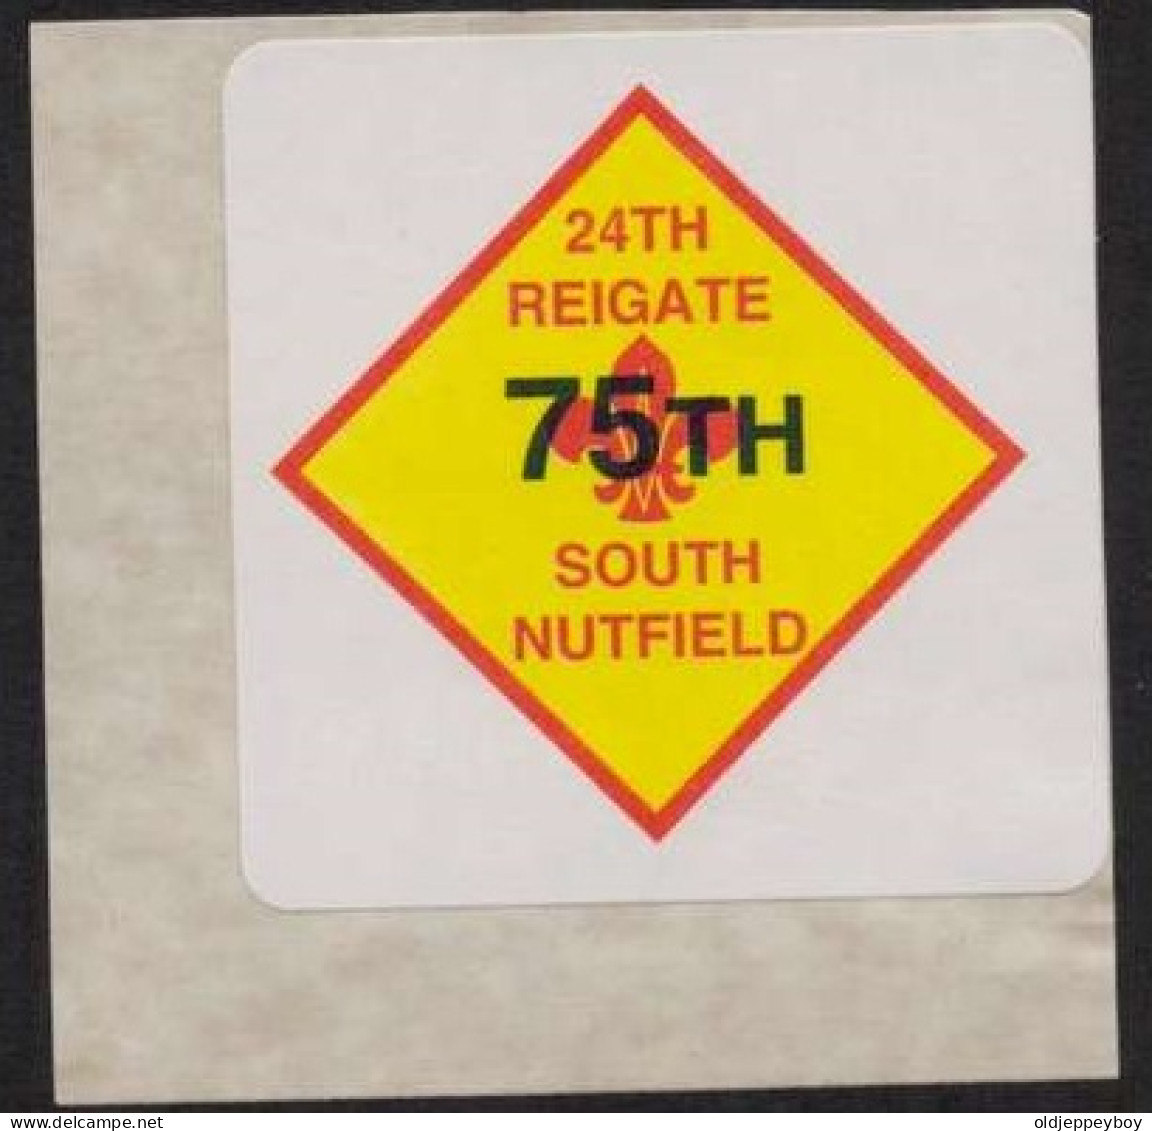 MNH**  75 Th South Nutfield 24TH REIGATE VIGNETTE SCOUTS POSTER STAMP  Pfadfinder CINDERELLA SCOUTING SCOUTISMO - Nuevos